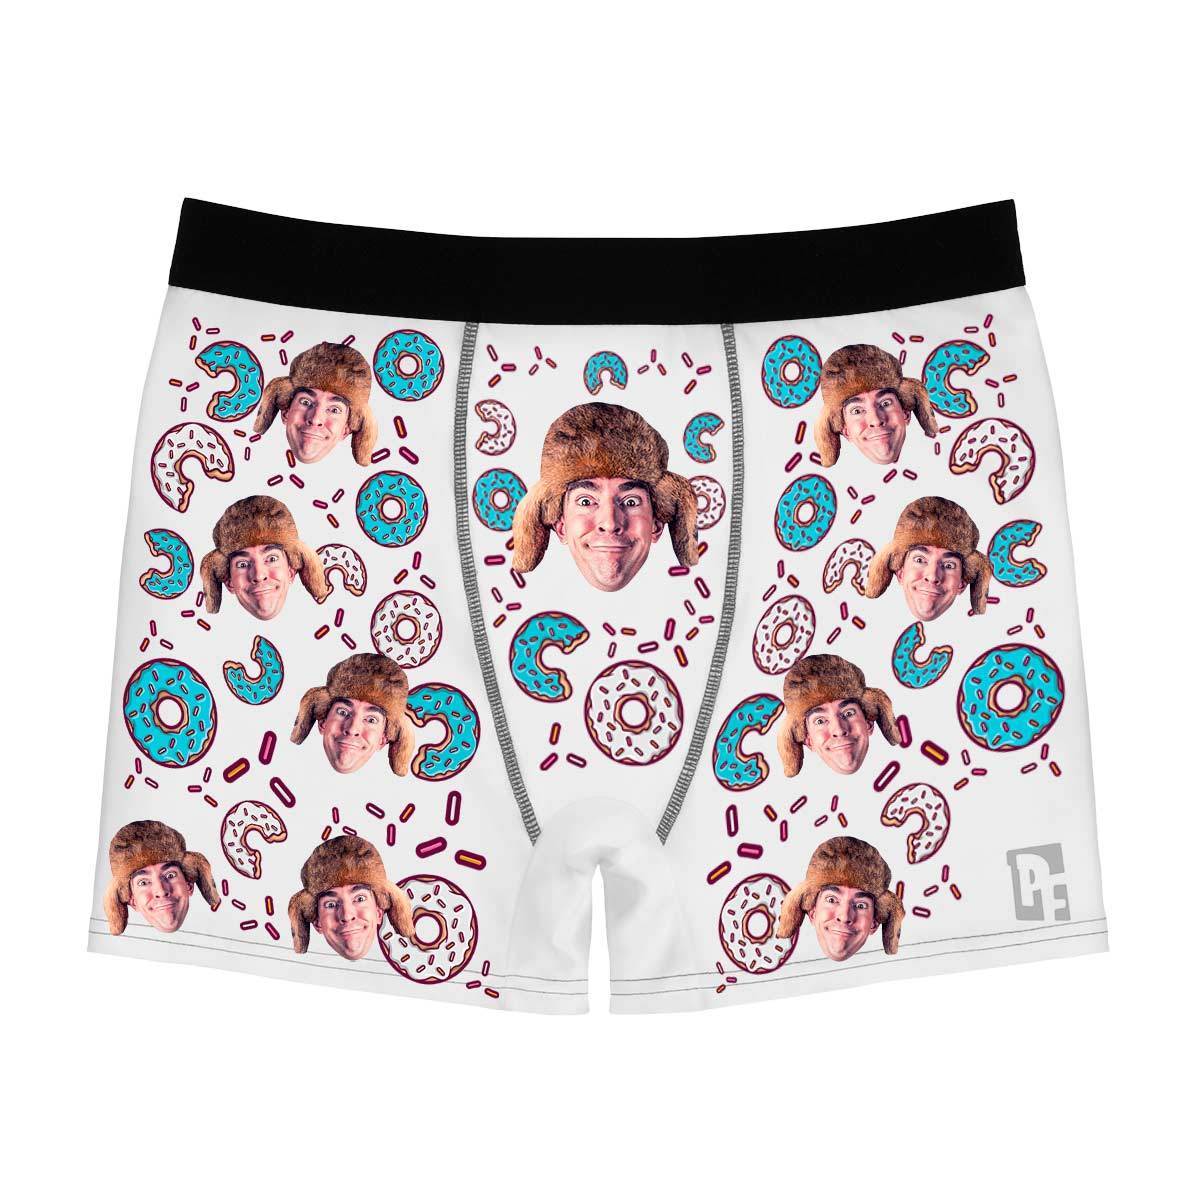 White Donuts men's boxer briefs personalized with photo printed on them